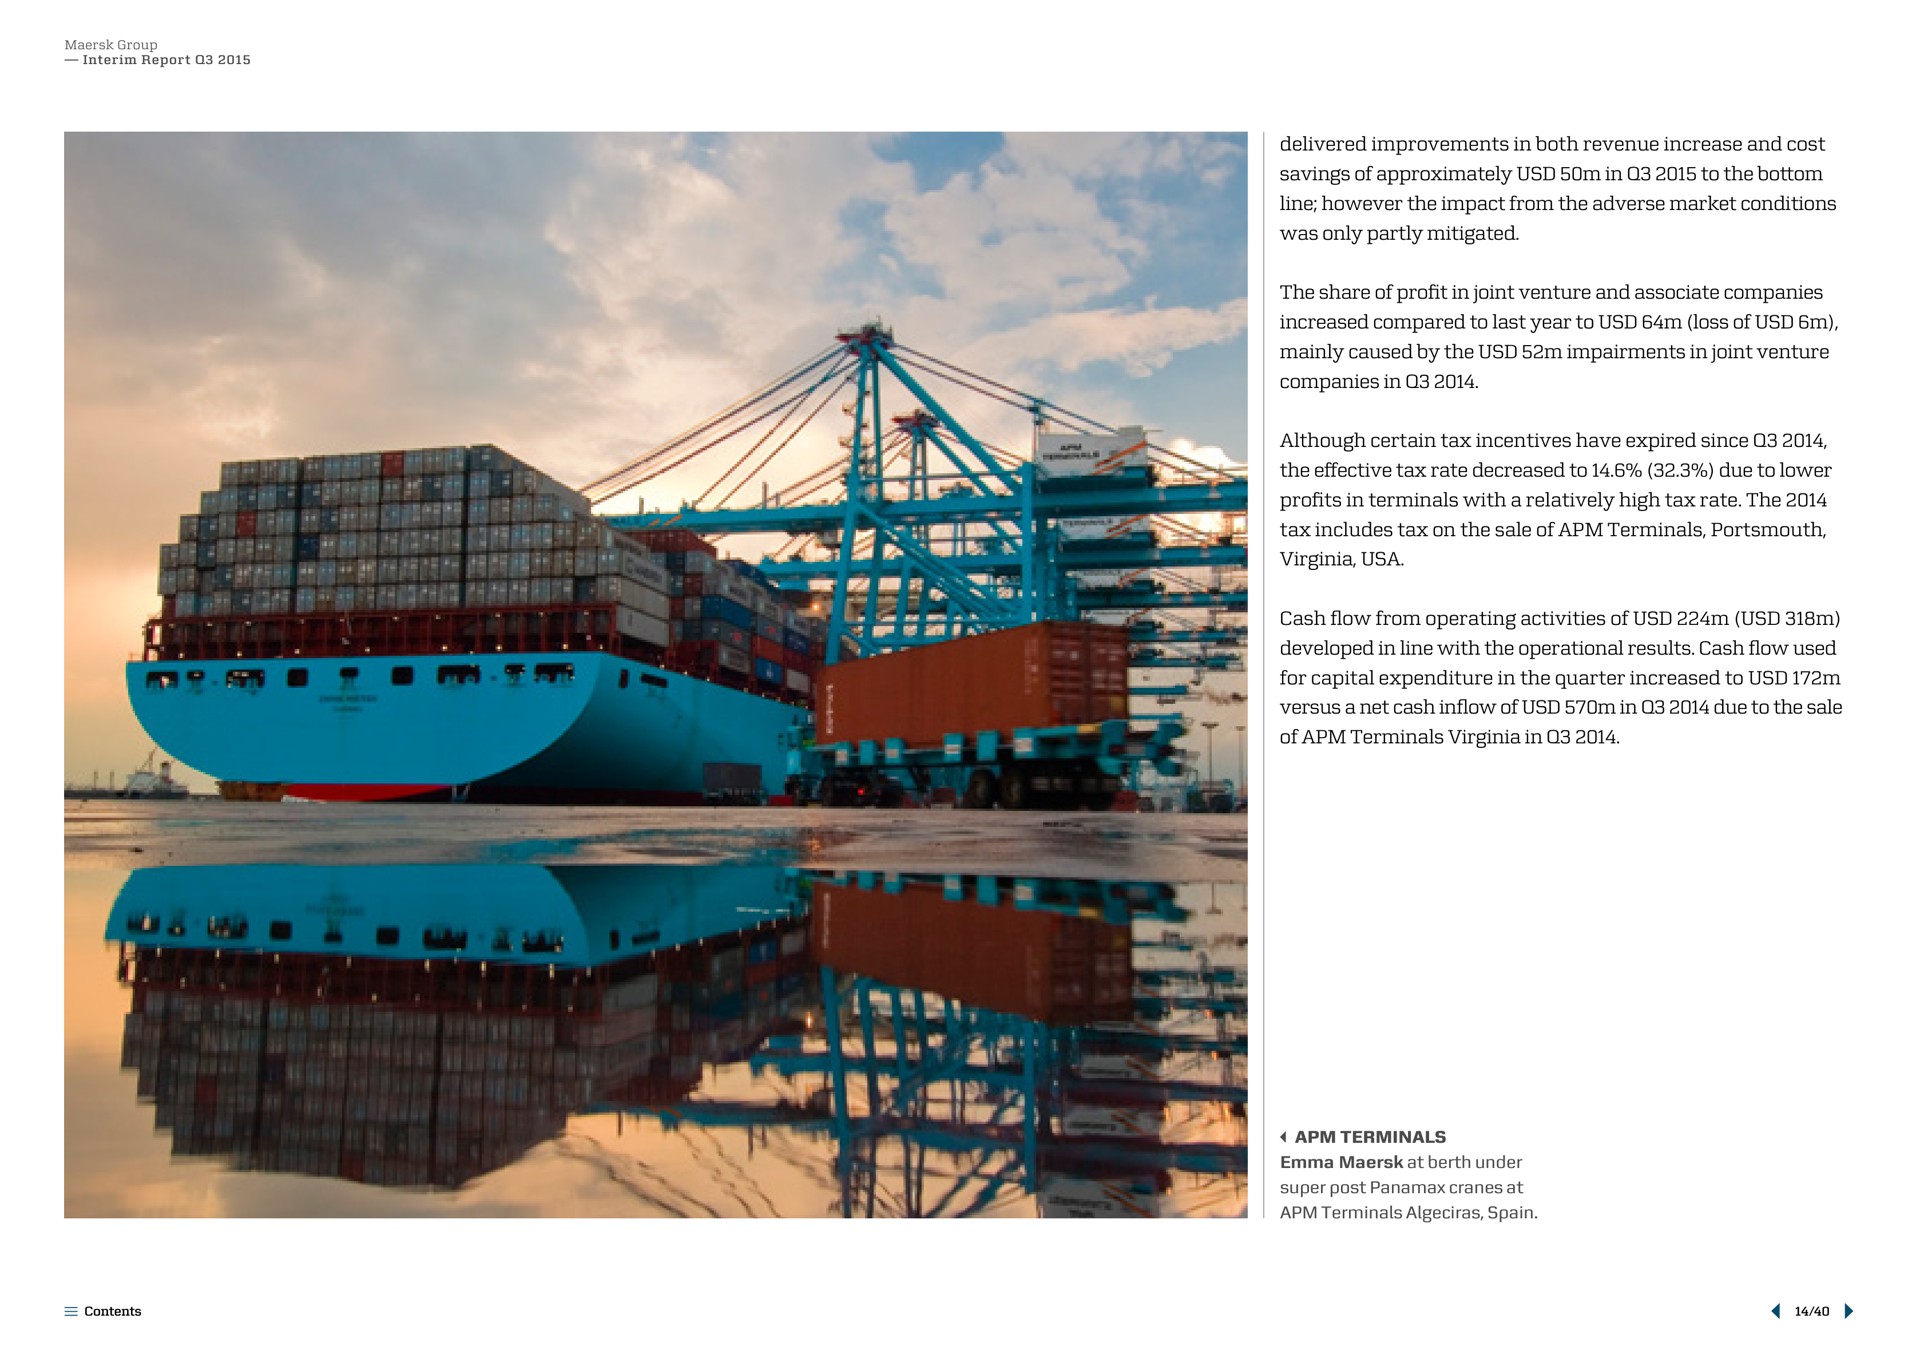 savings of approximately in to the bottom was only partly mitigated versus a net cash inflow of in due to the sale | Maersk